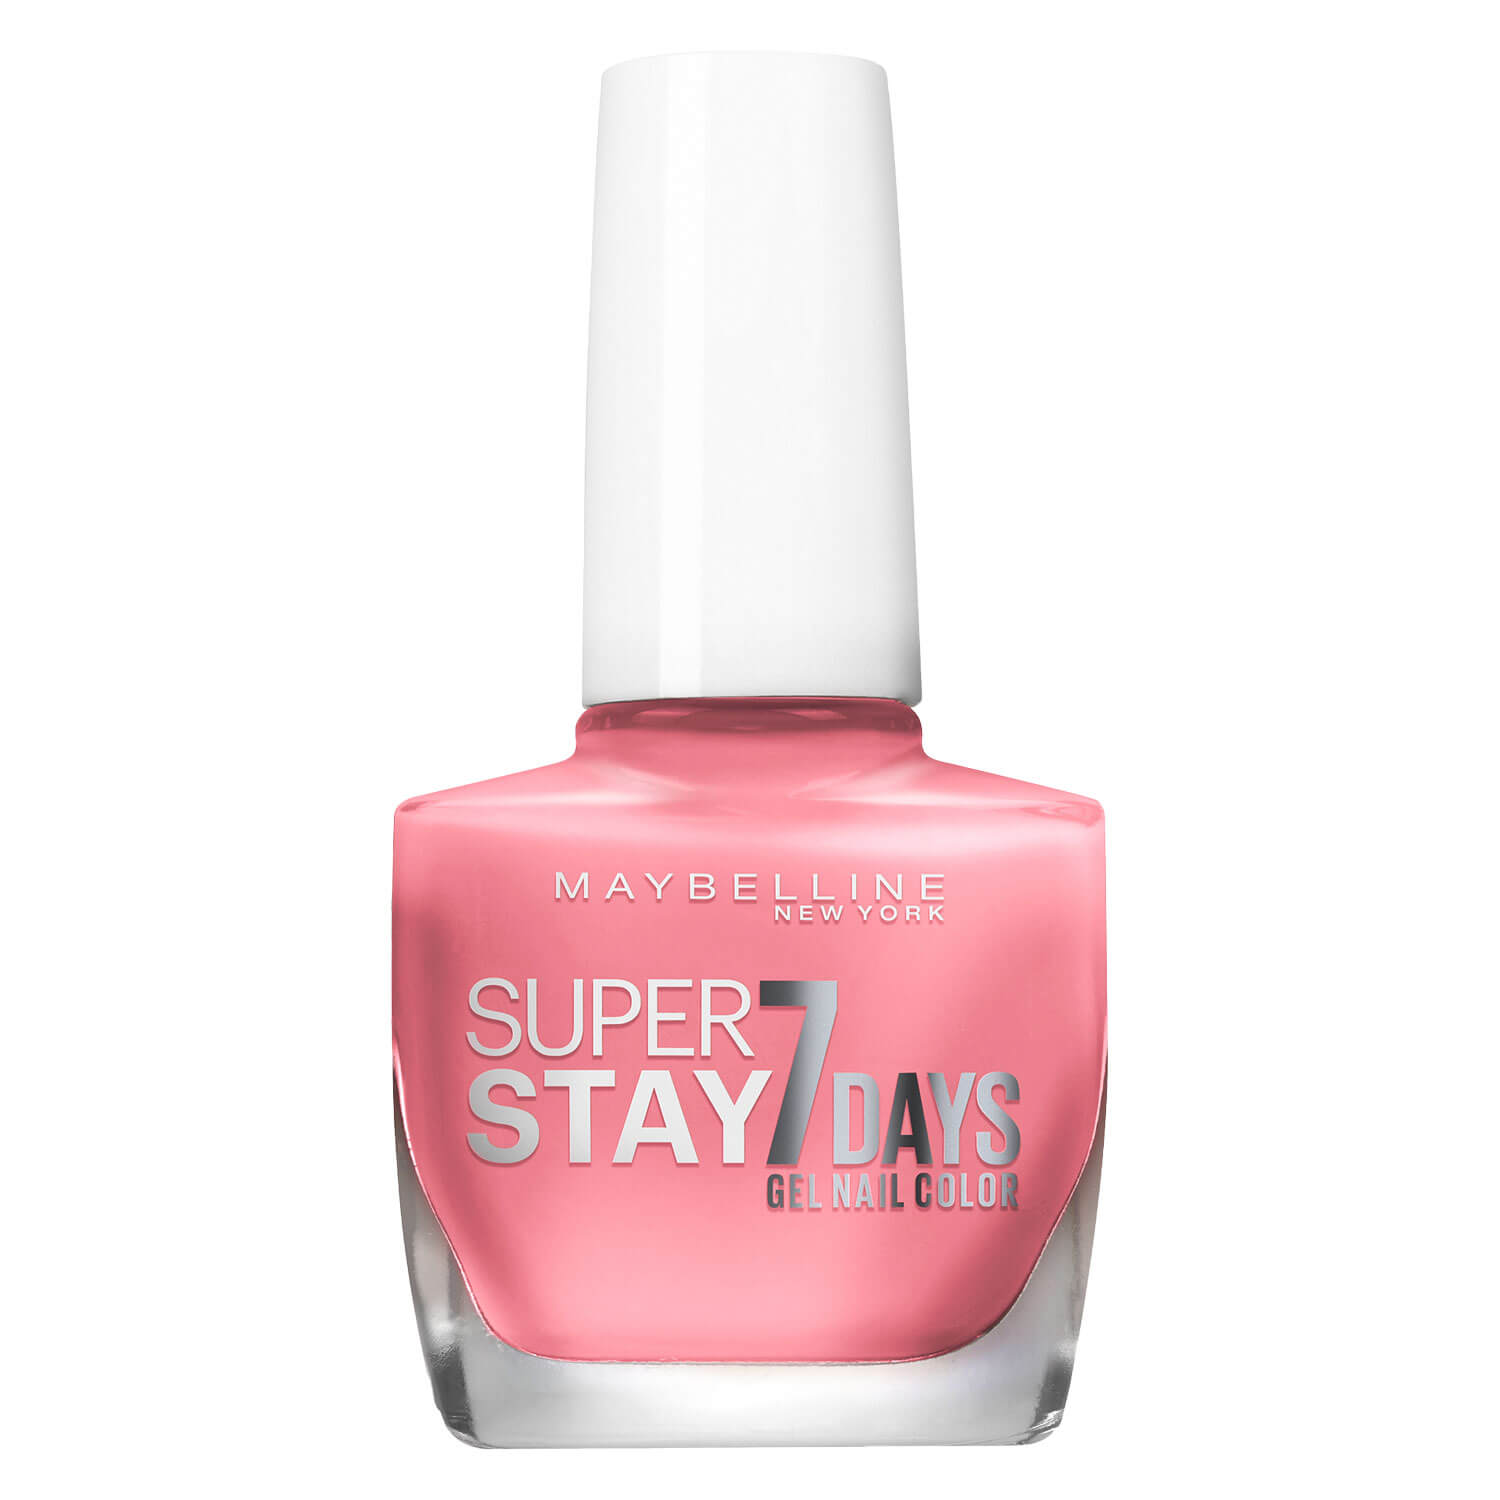 Days NY Stay Nail Nails about 7 it Pink - Maybelline Super 926 Polish No.